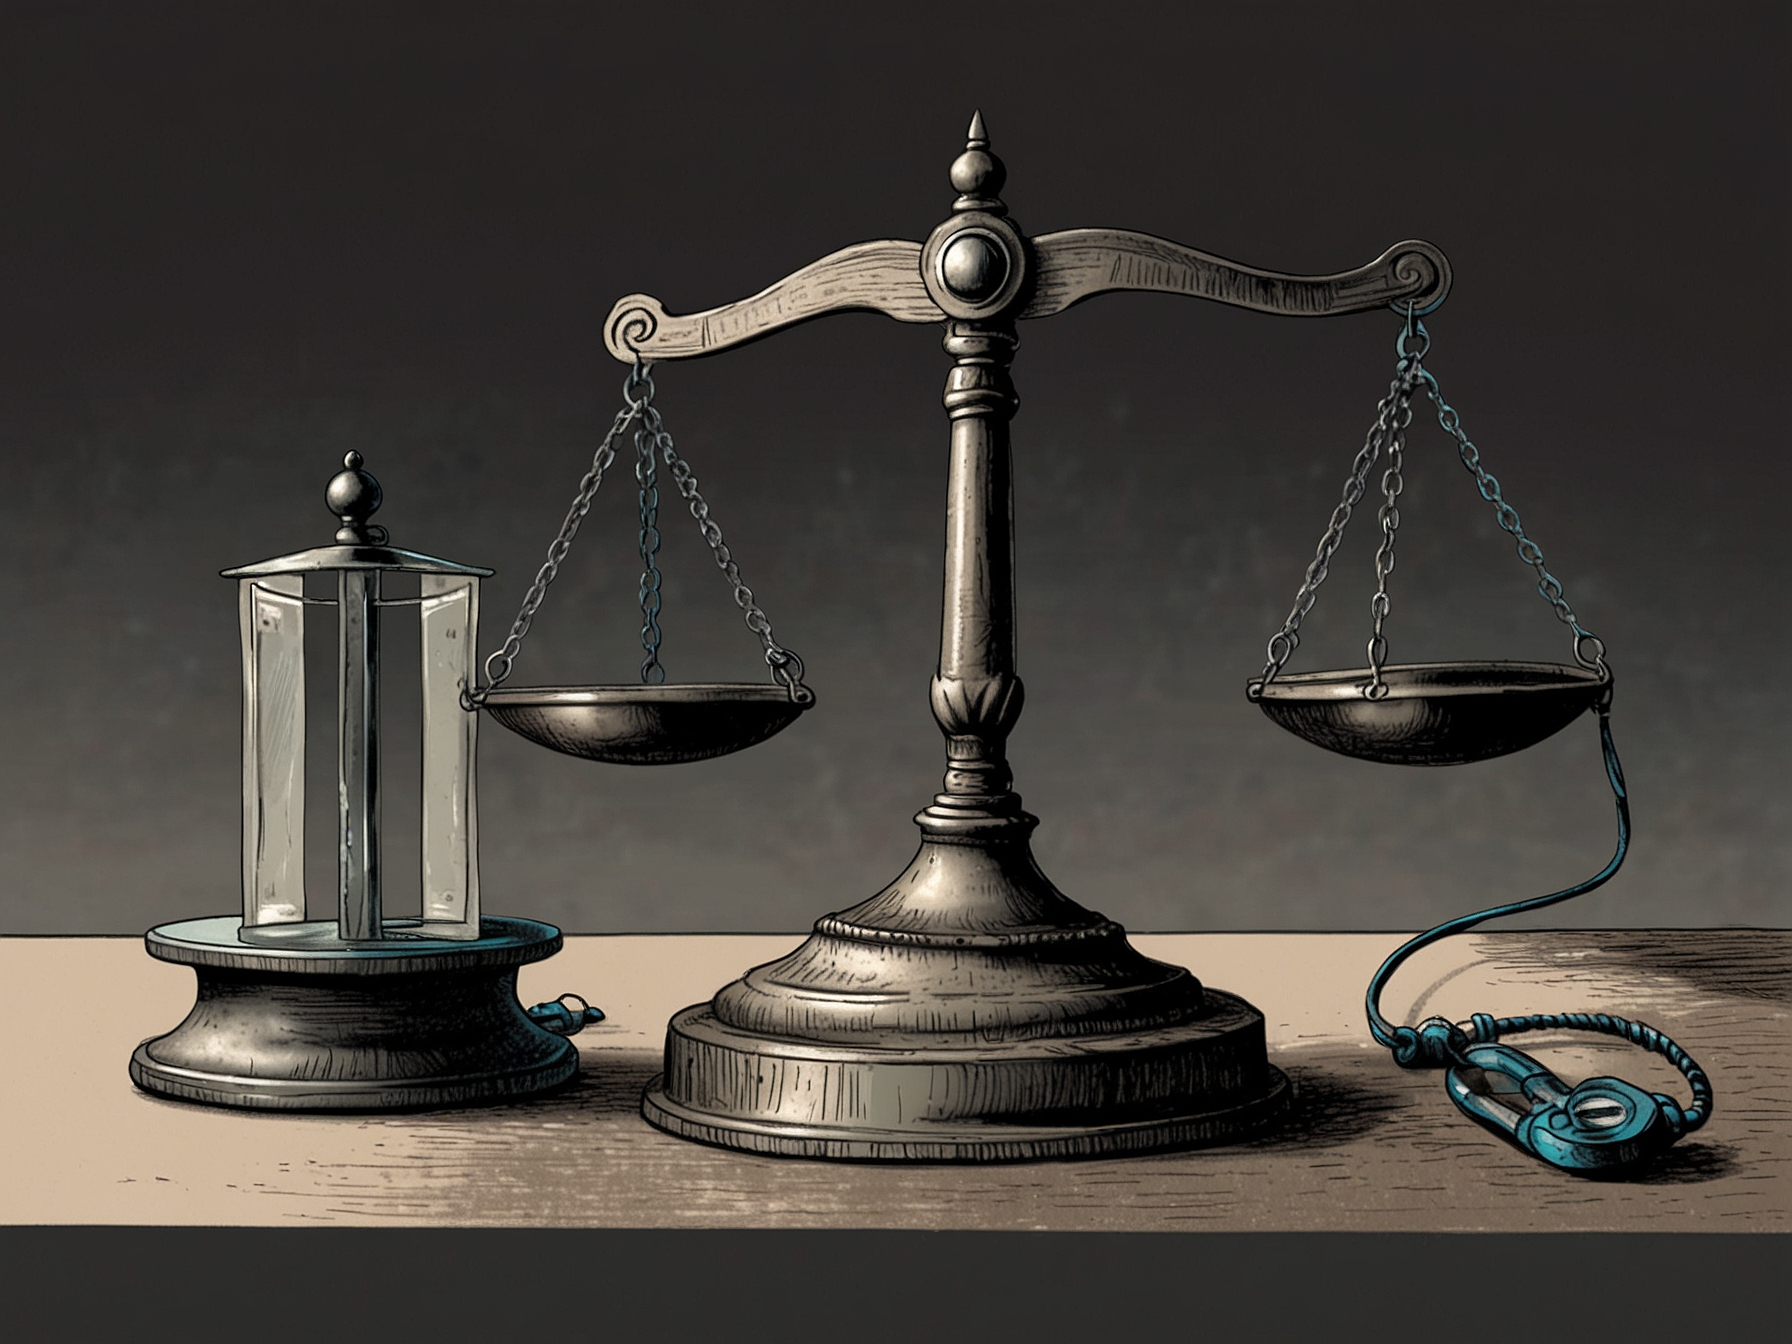 A scales of justice graphic juxtaposed with a gagged microphone, representing the tension between maintaining professional conduct and protecting free speech rights for lawyers.